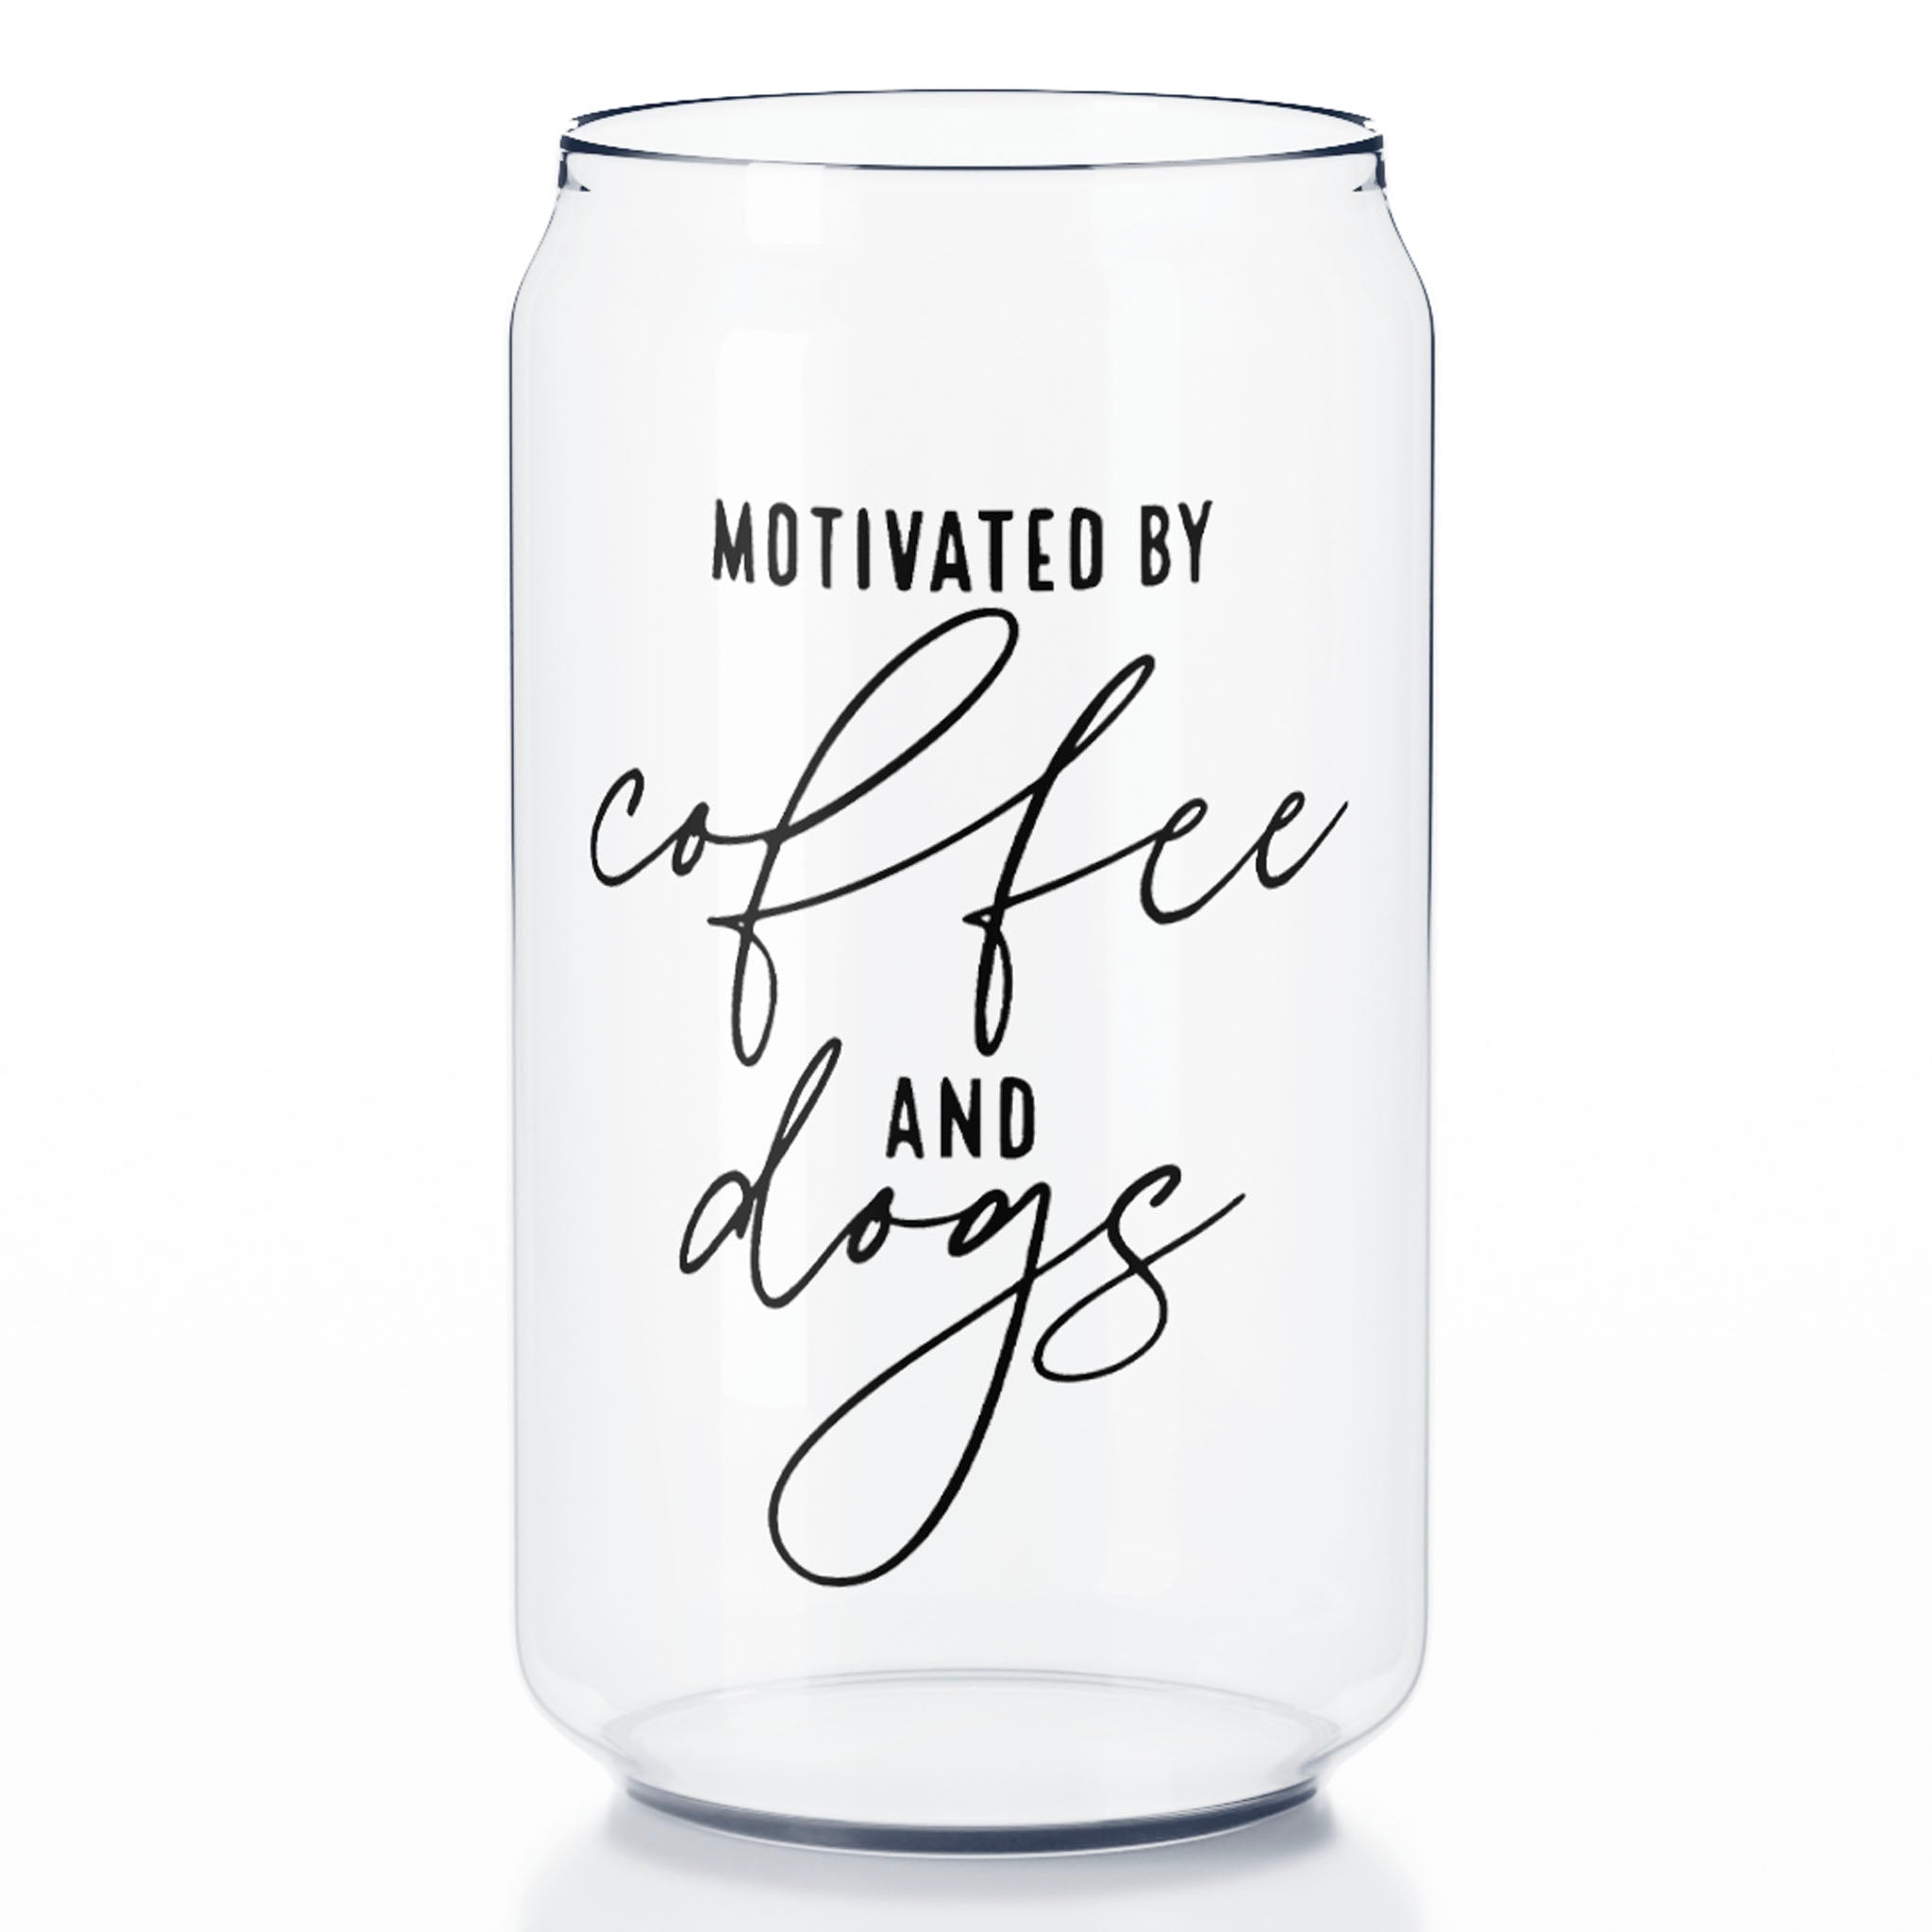 Motivated by Coffee + Dogs